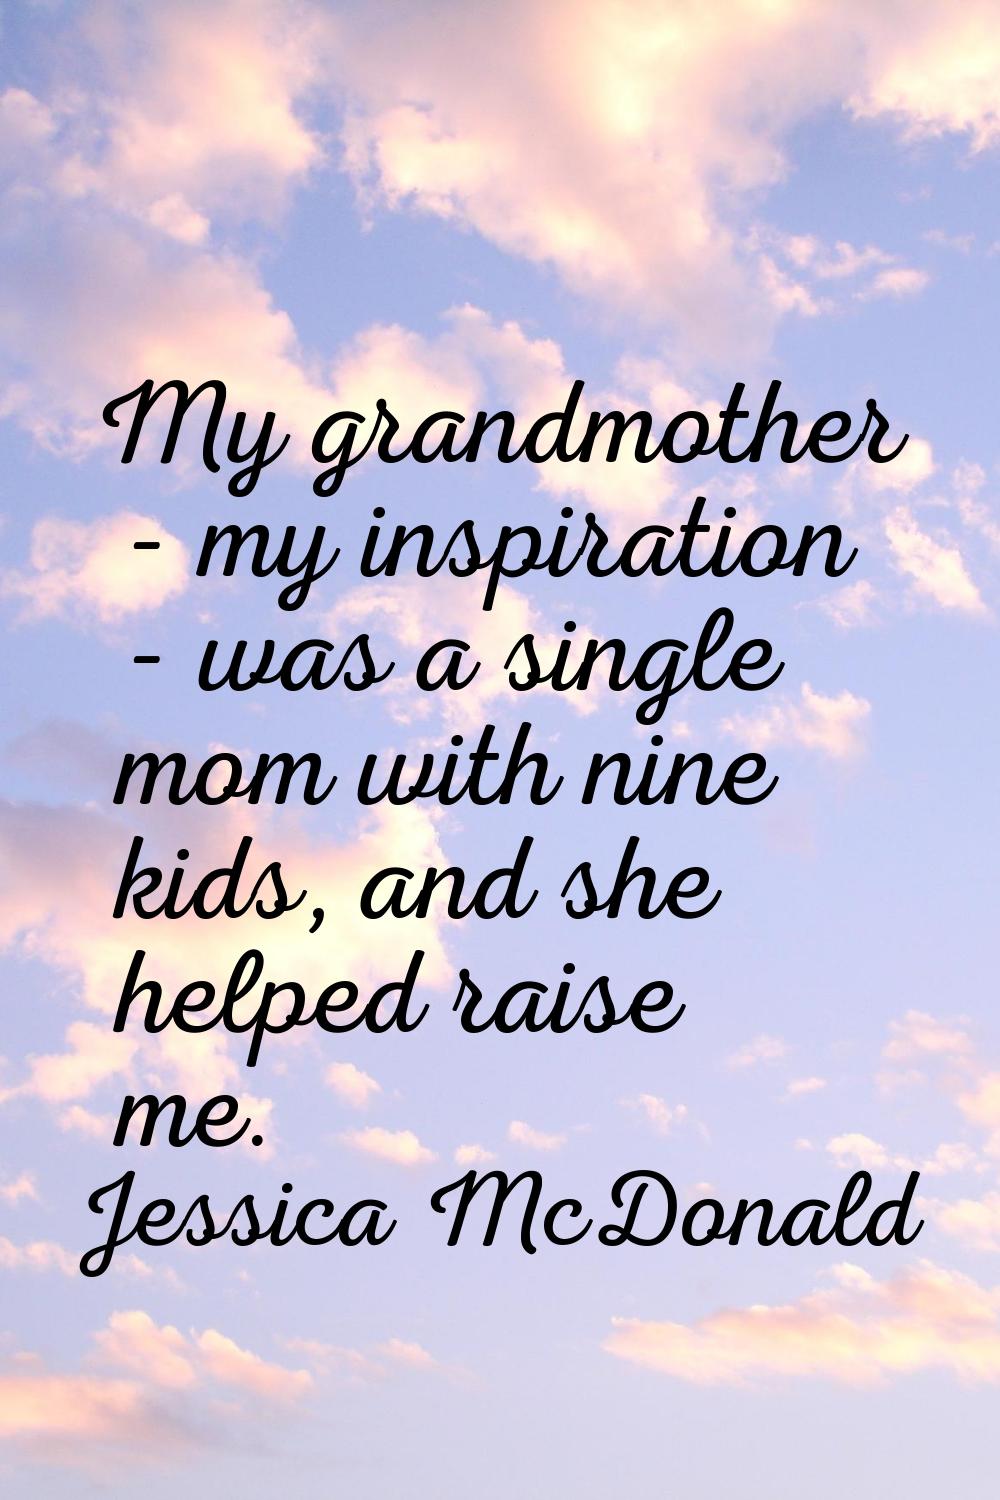 My grandmother - my inspiration - was a single mom with nine kids, and she helped raise me.